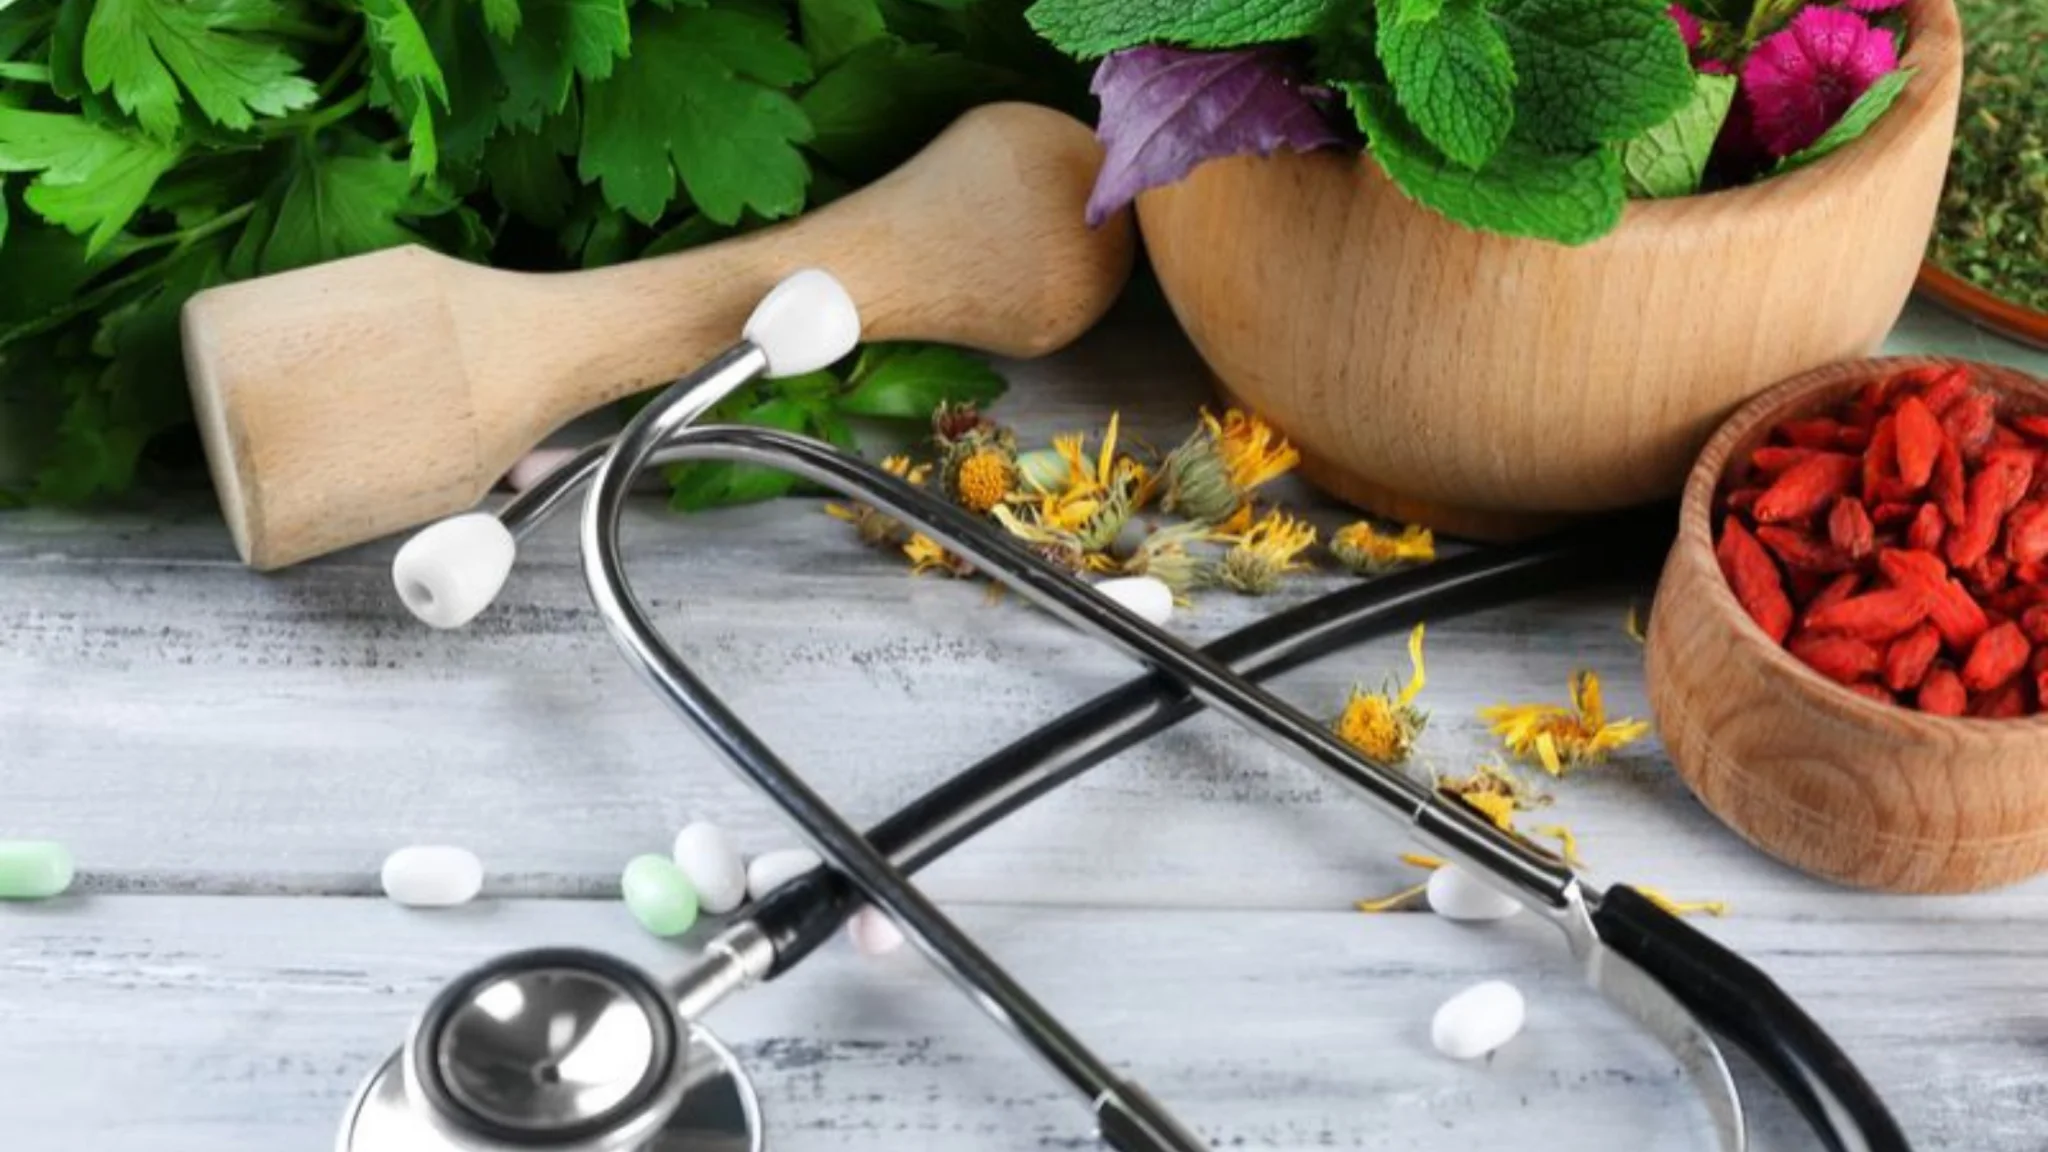  why you should visit a naturopath, naturopathy center in Udaipur